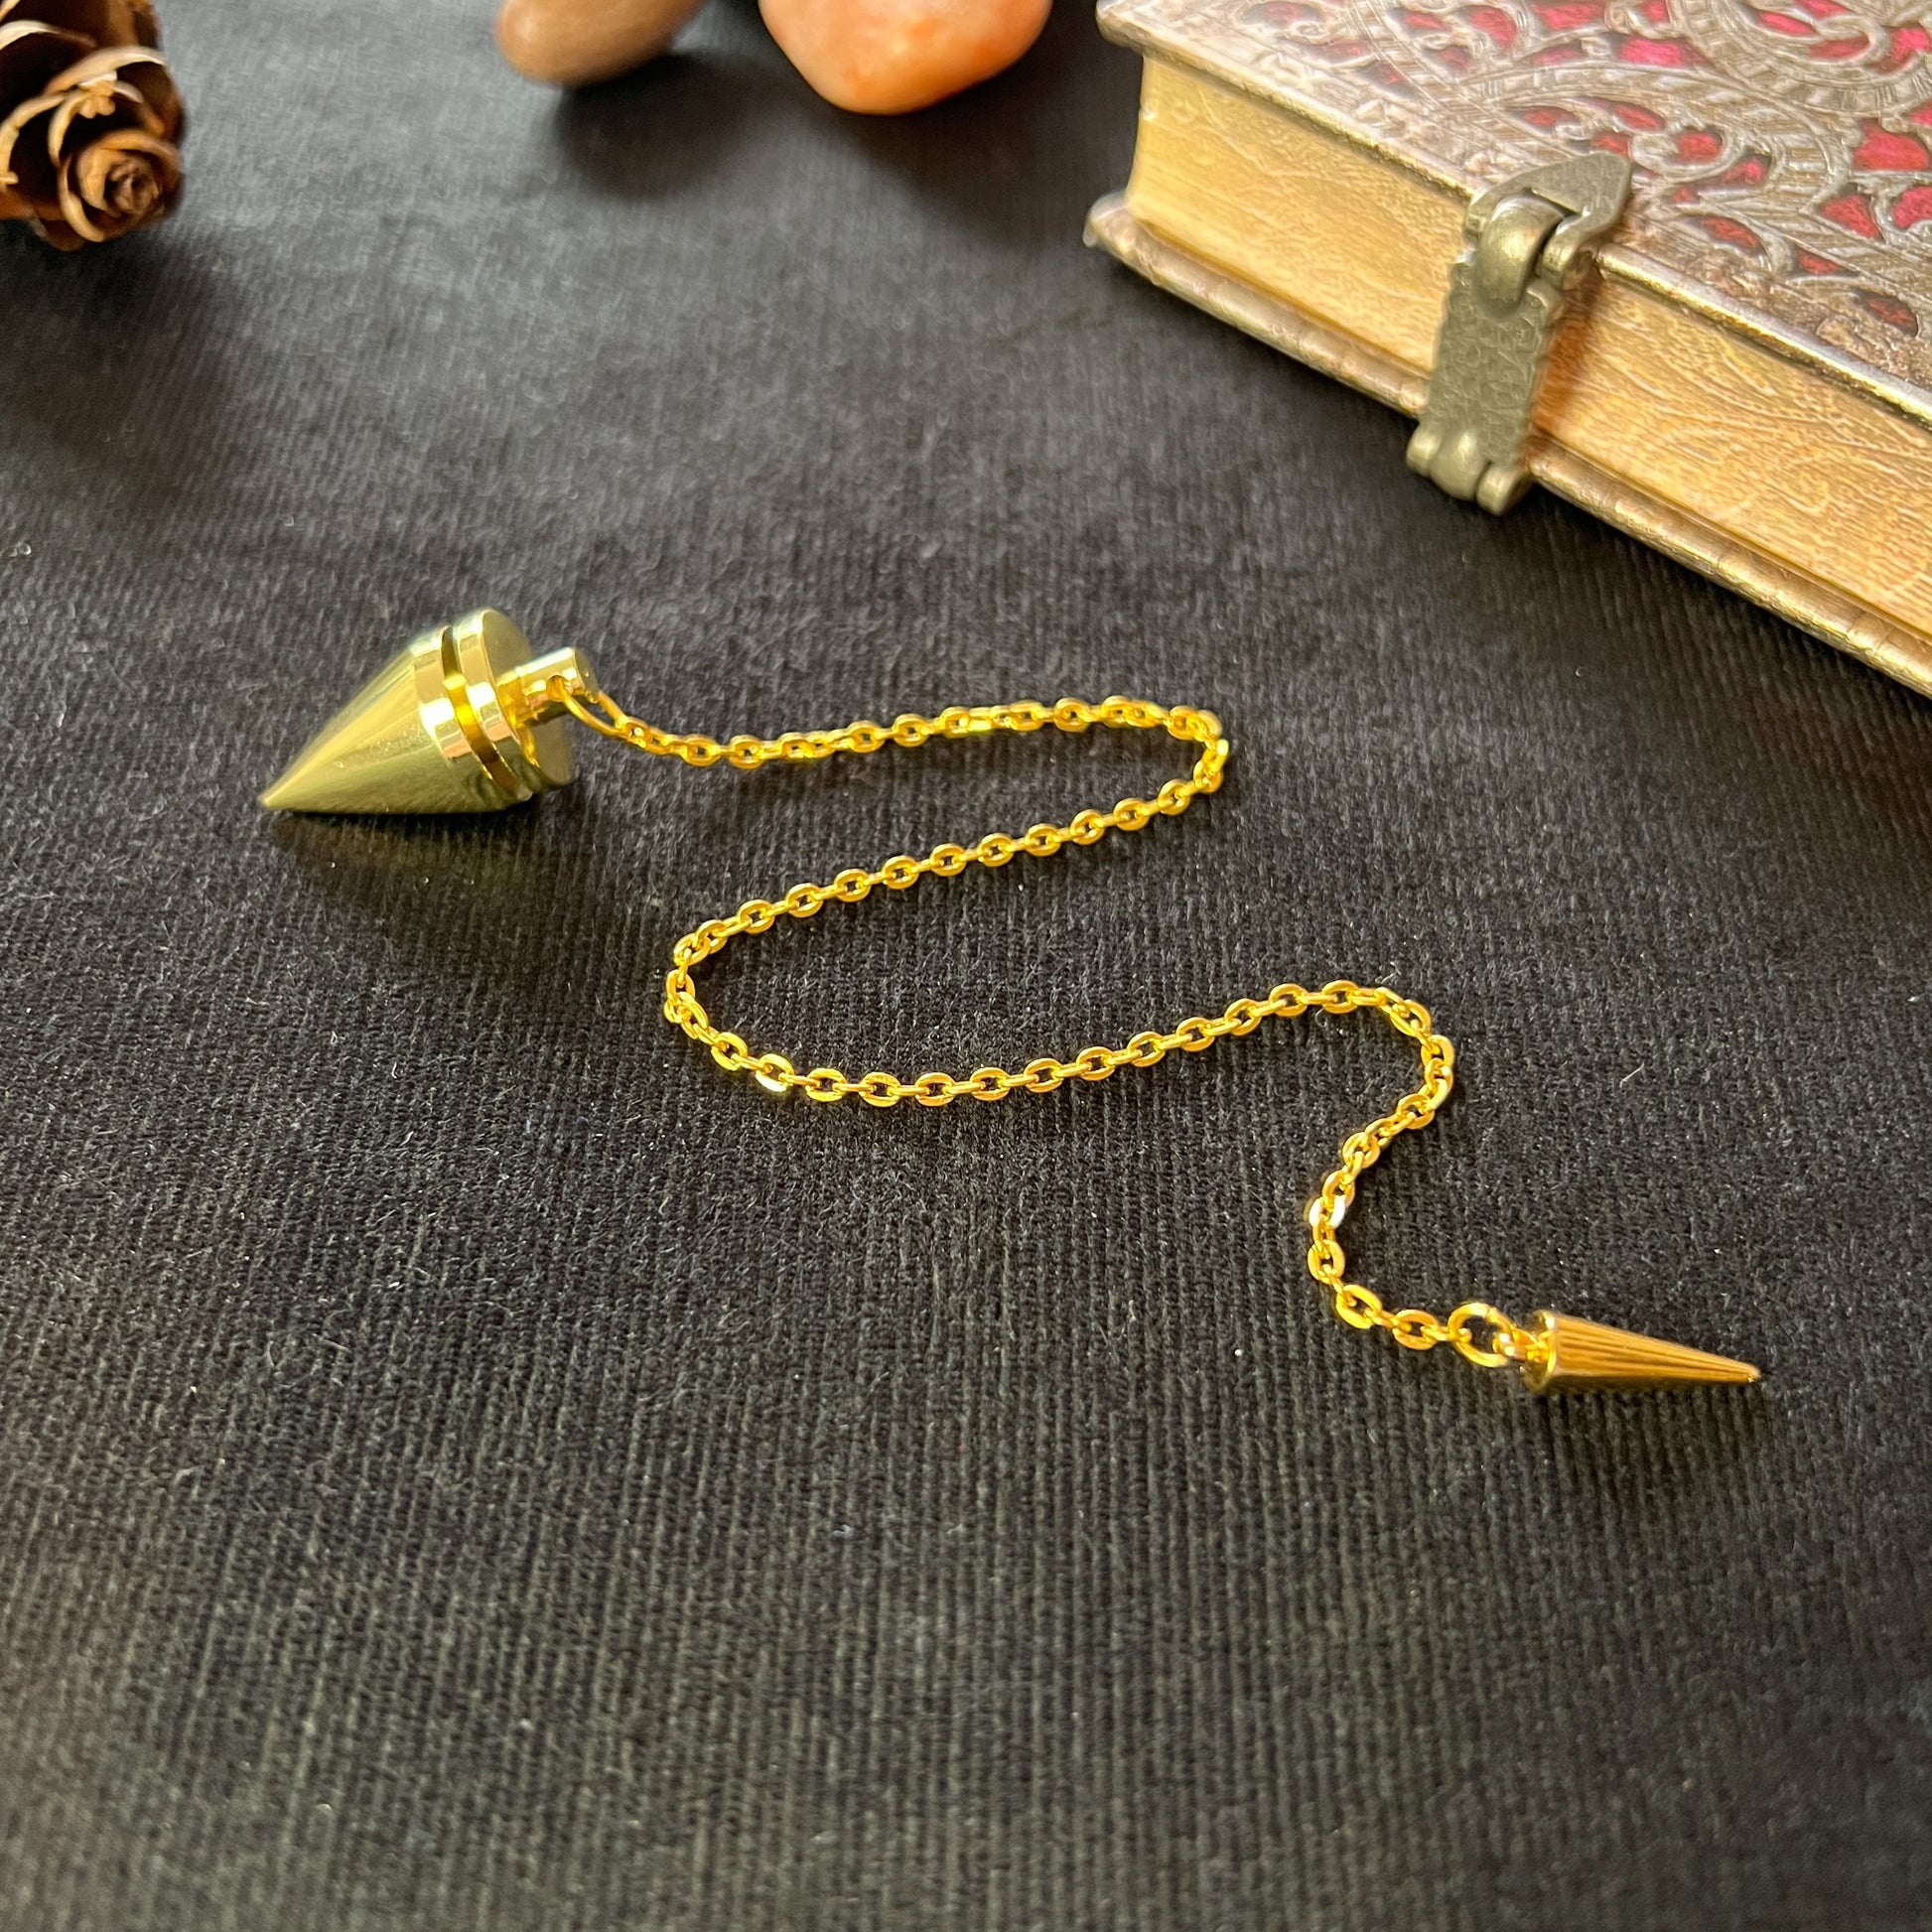 Cone and coil divination pendulum golden dowsing pendulum with a spike charm divination tool